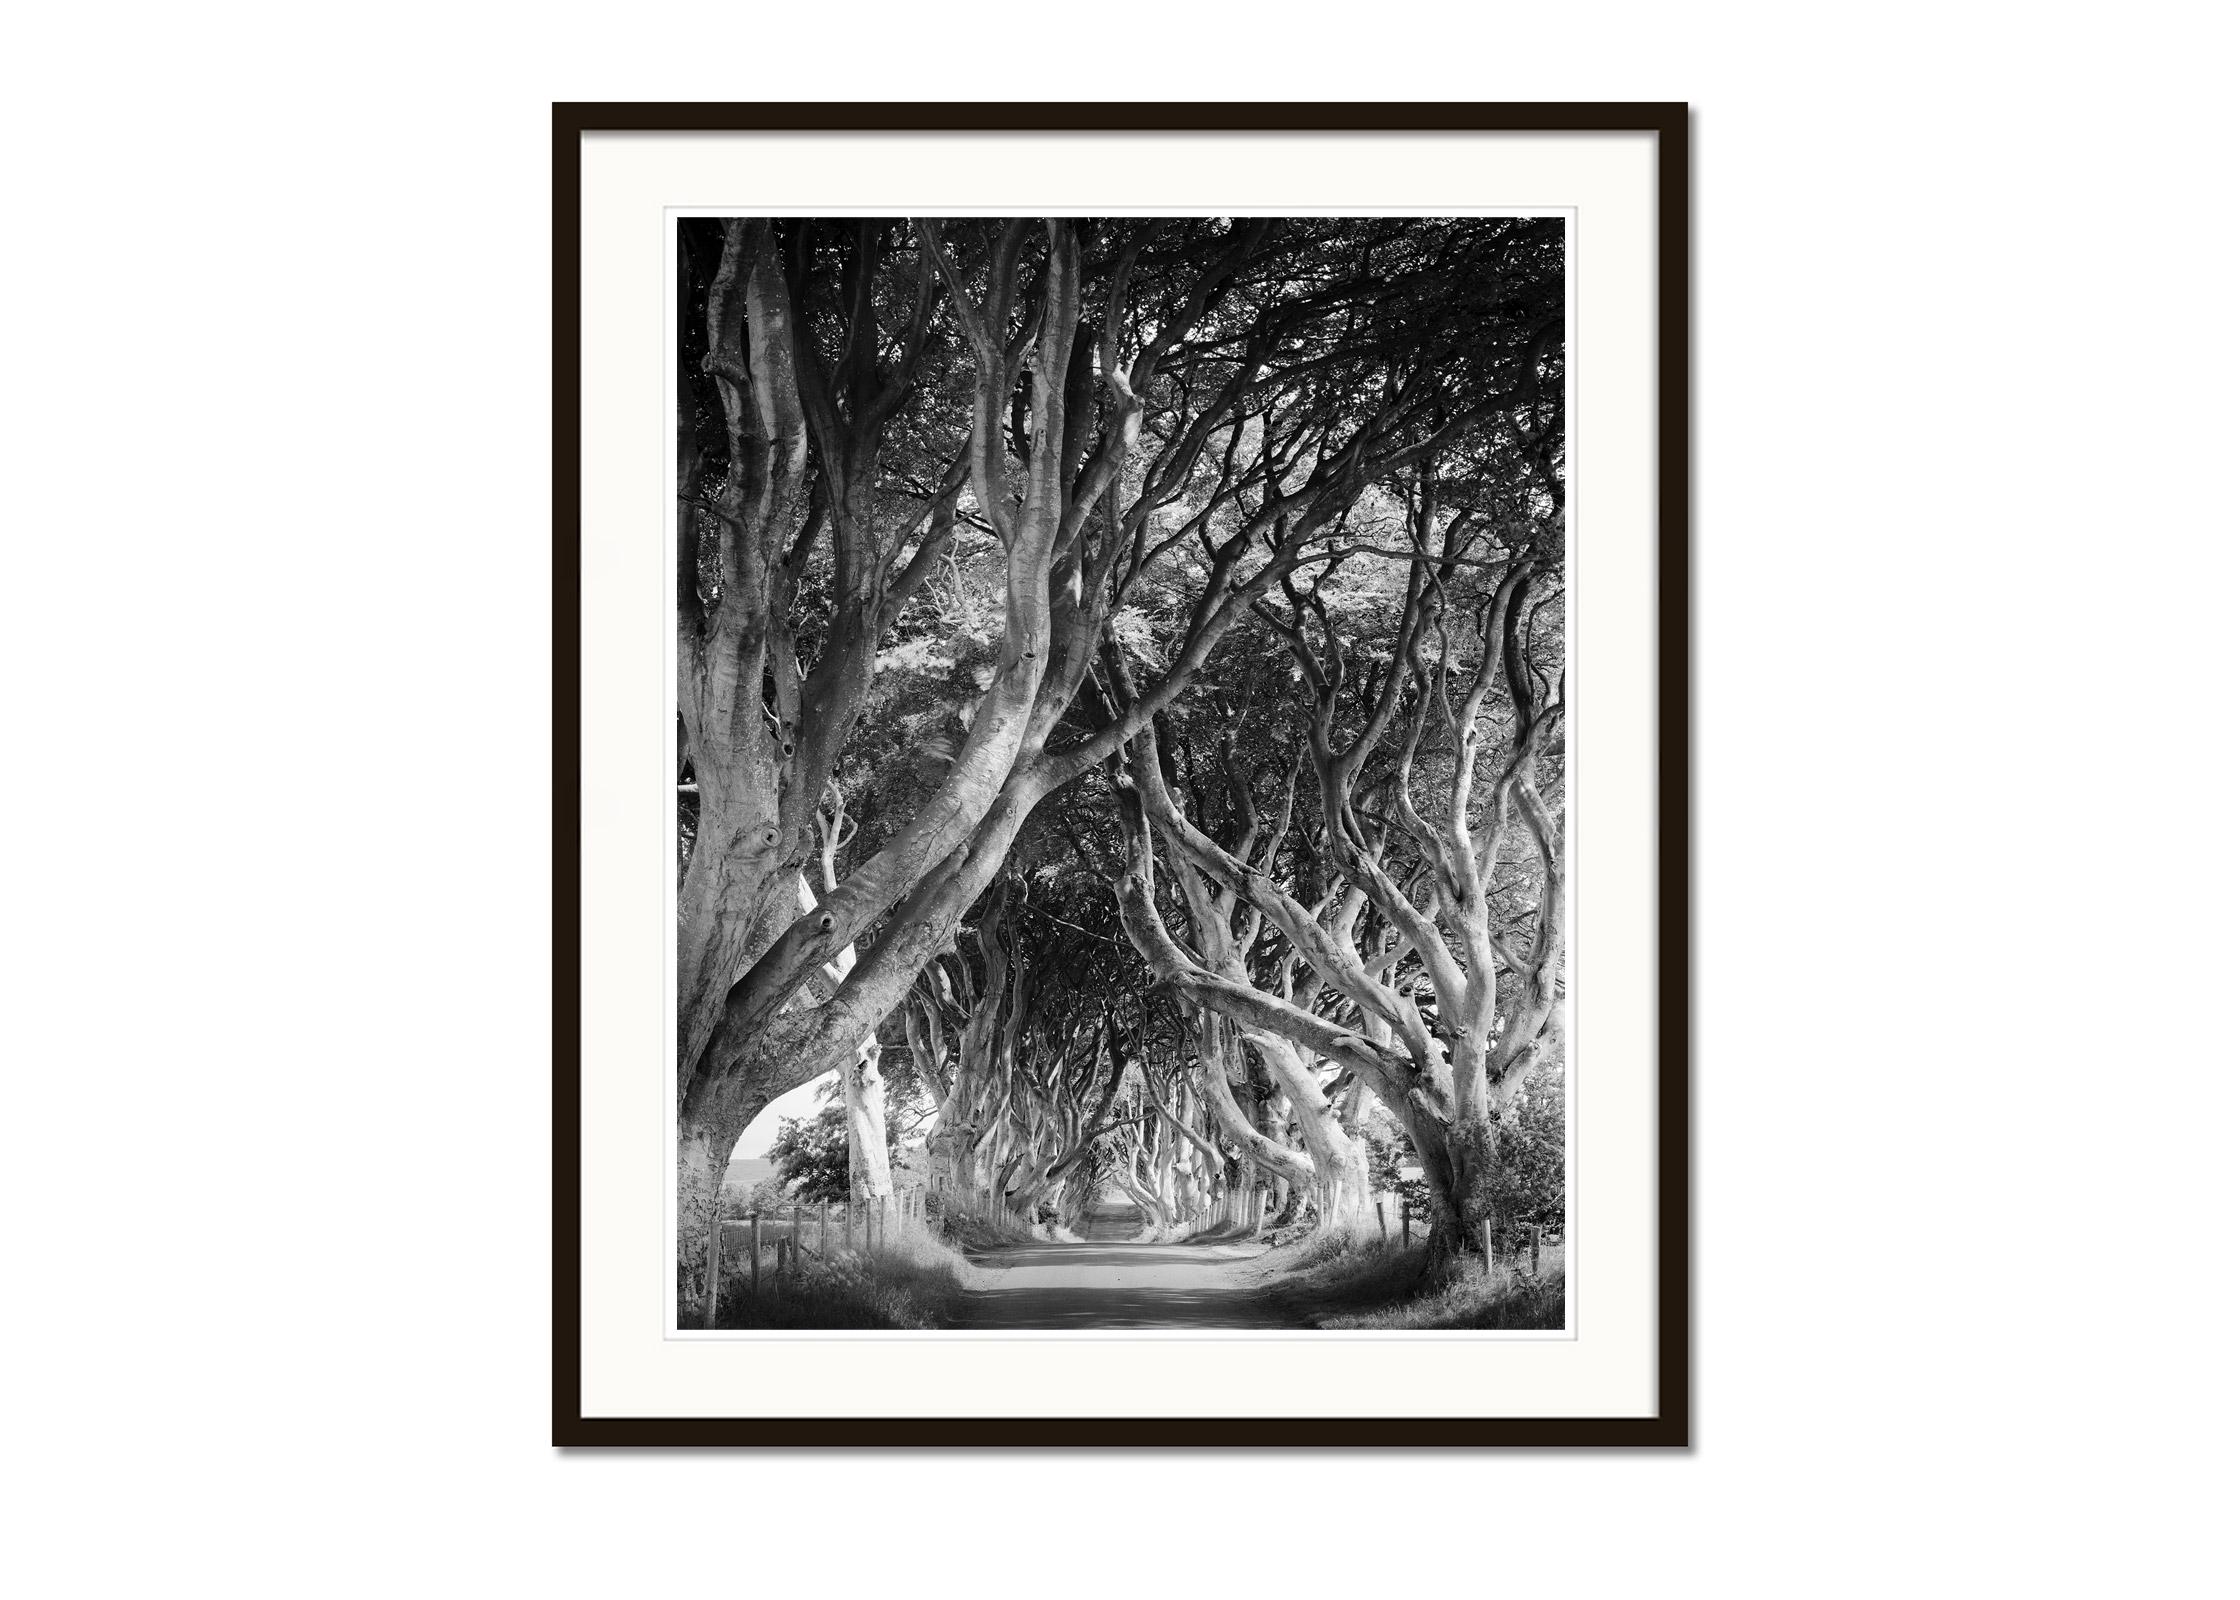 Dark Hedges, tree avenue, mystical forest, black & white landscape photography - Gray Black and White Photograph by Gerald Berghammer